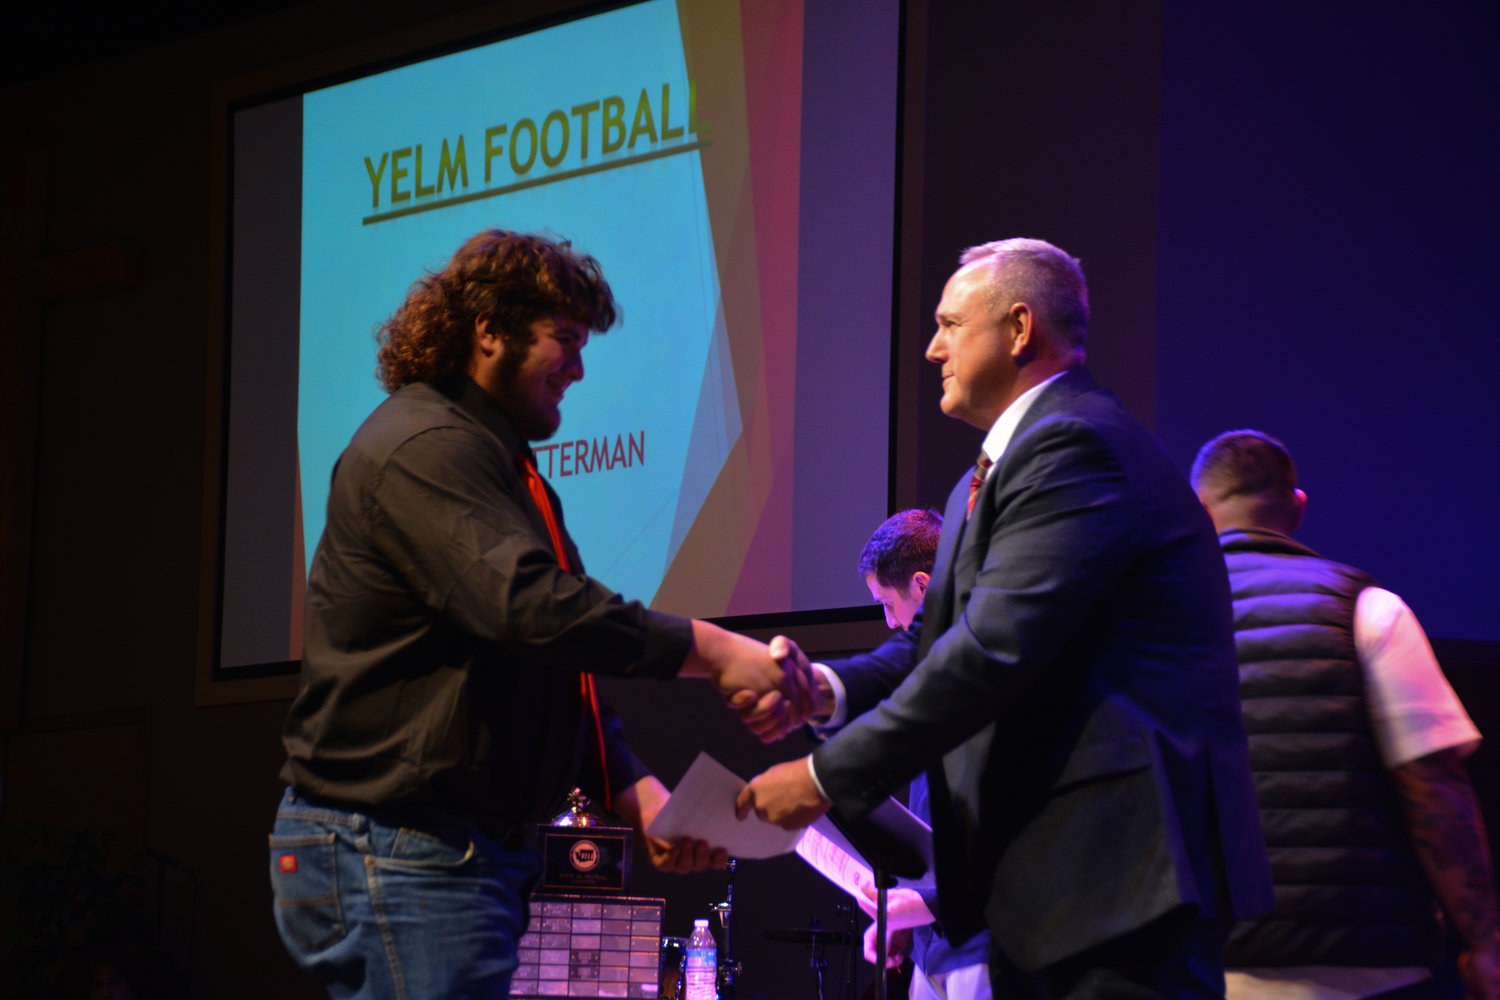 Junior two-way lineman Landen Barger, who was voted South Sound Conference lineman of the year, accepts his varsity letter from offensive line coach Brian Foote.